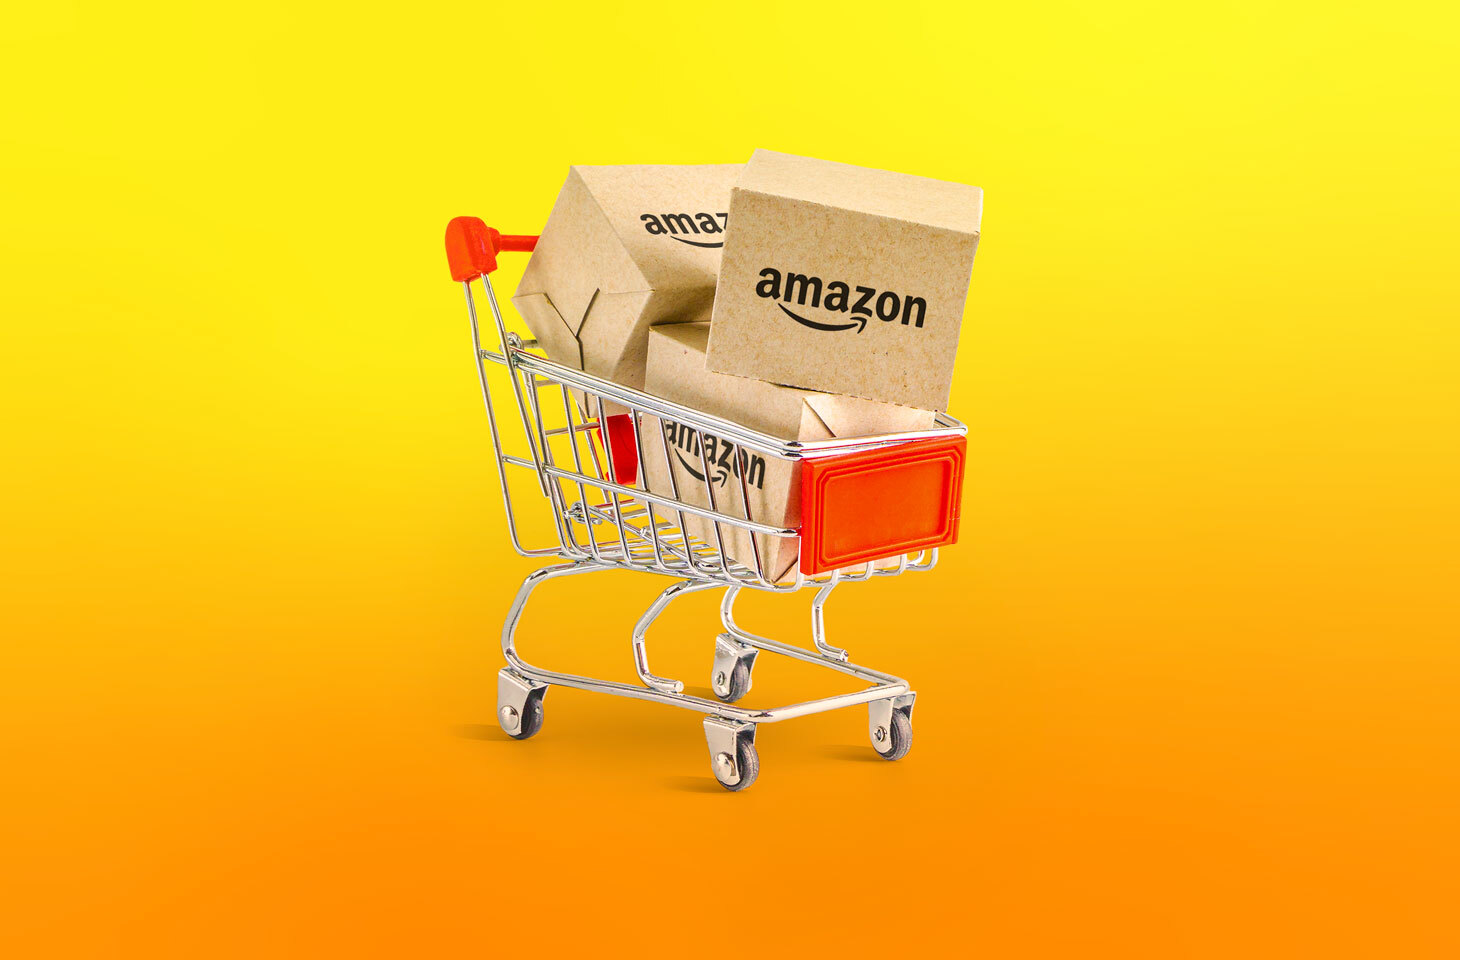 Some of the most commonly encountered Internet scams related to Amazon